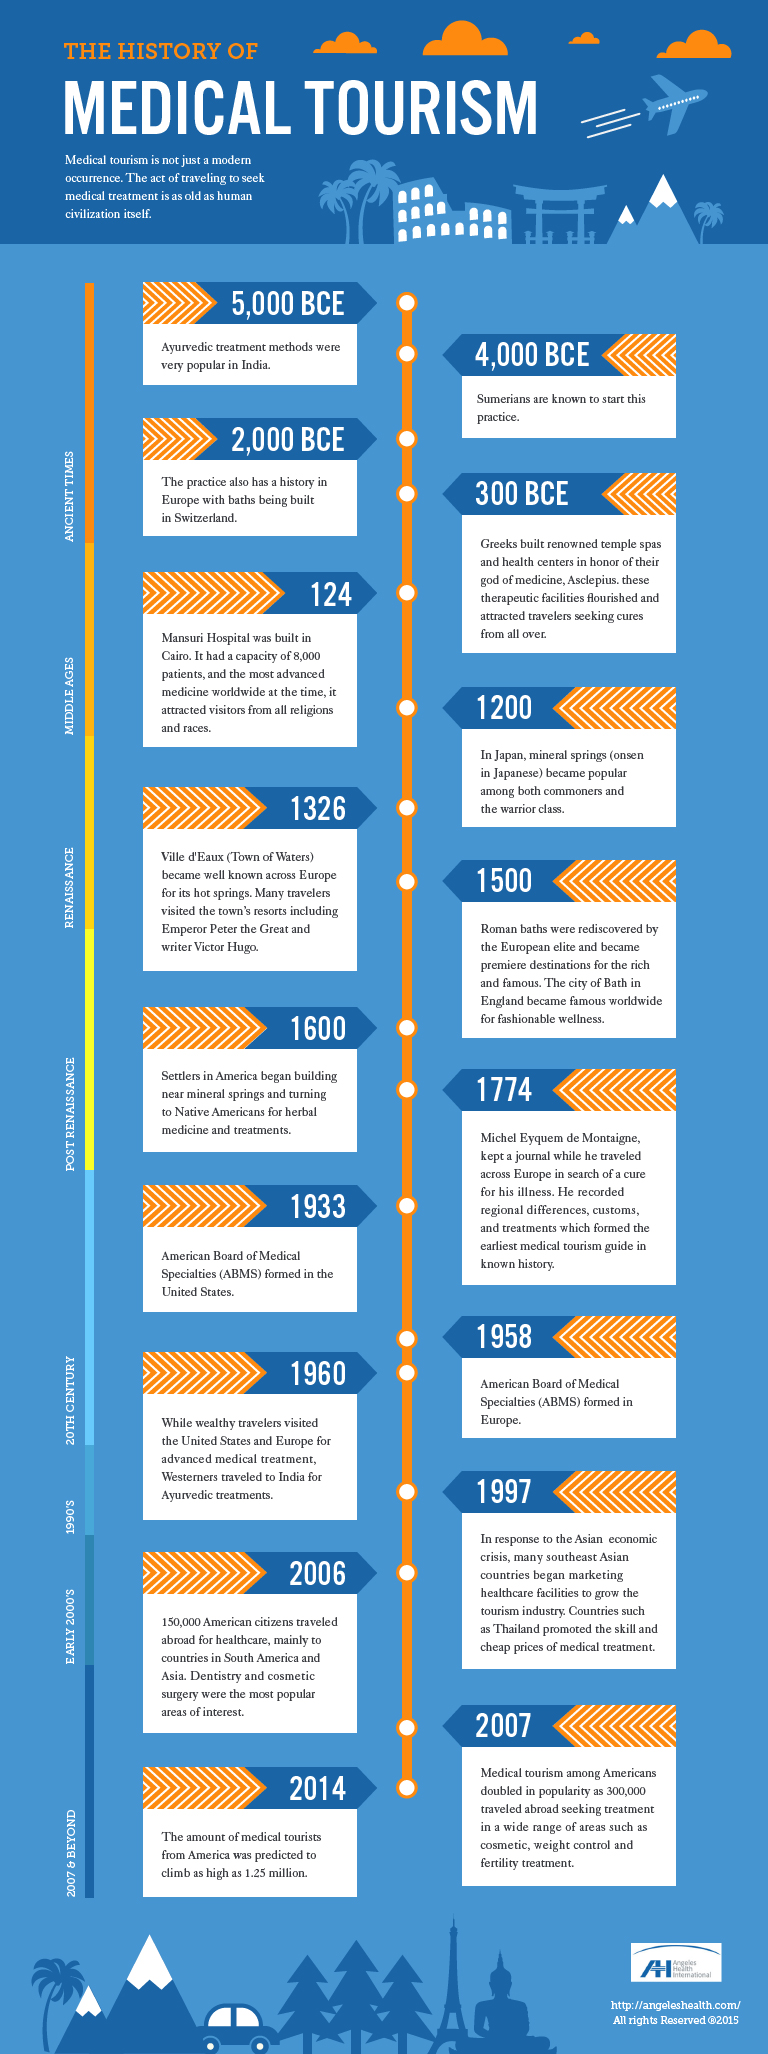 The History of Medical Tourism